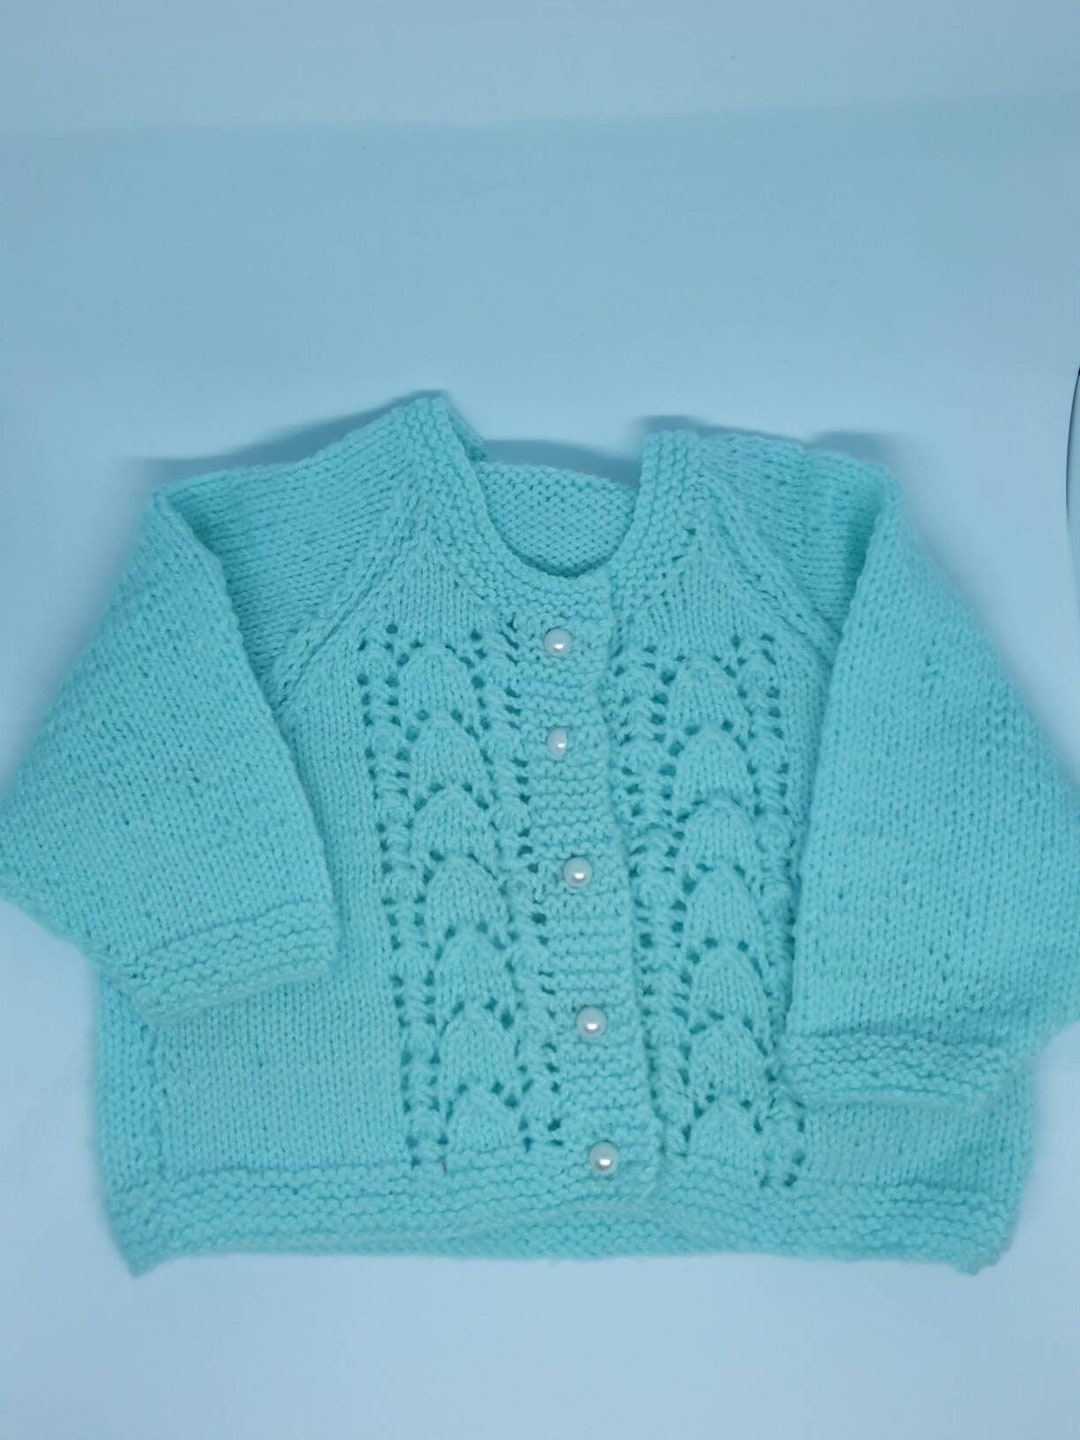 Patterned Cardigan Baby Wear Mint Green Hand Knitted - Etsy UK